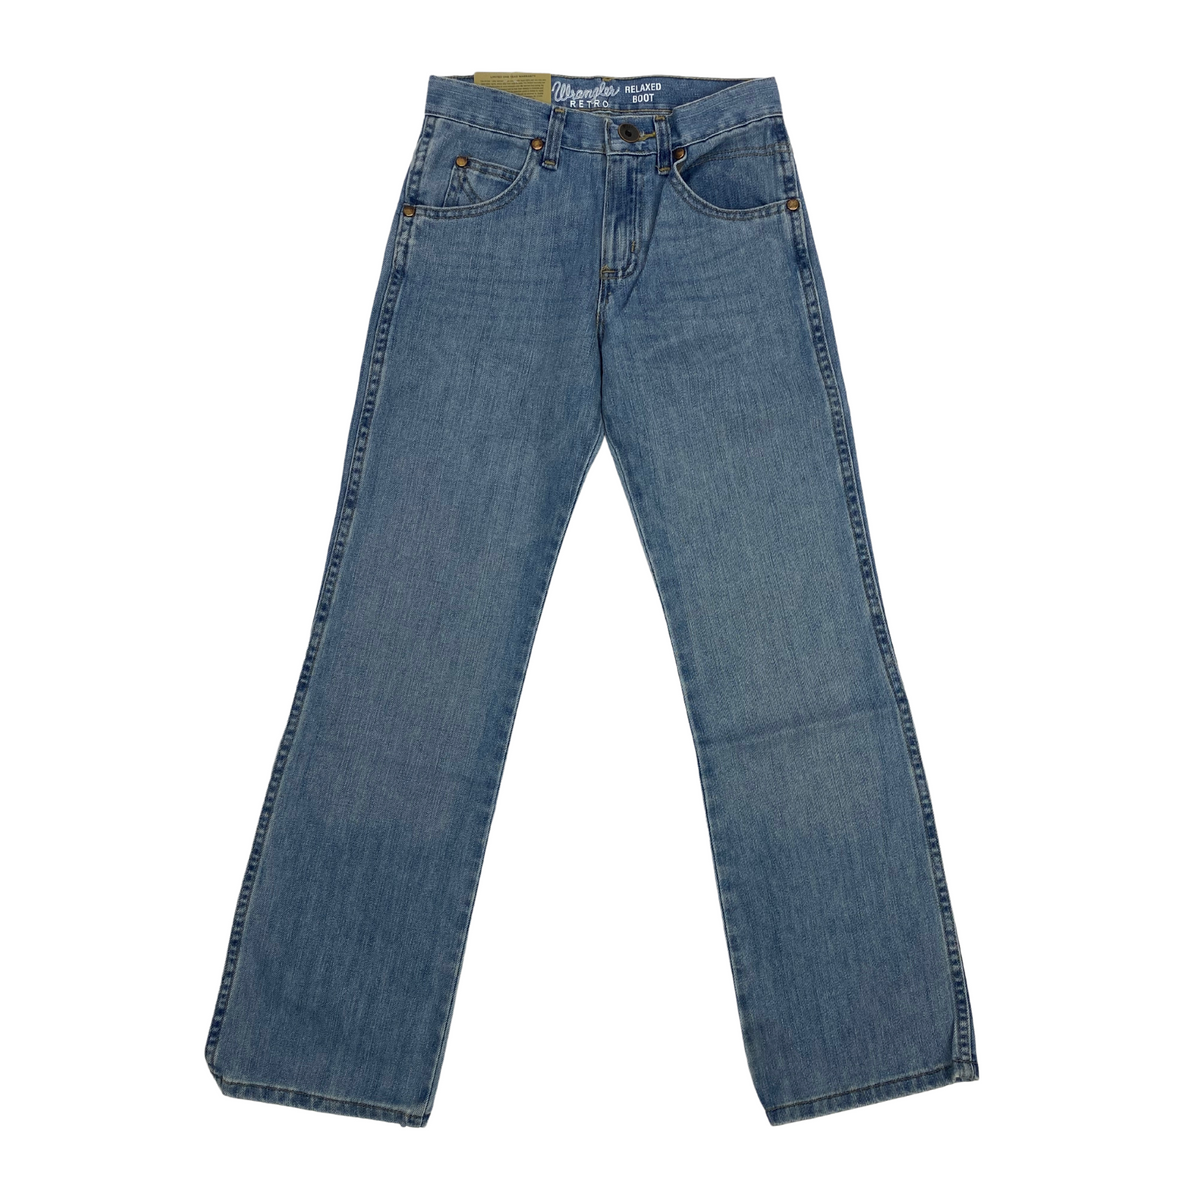 Boys Wrangler Retro Relaxed Boot Light Washed Jeans